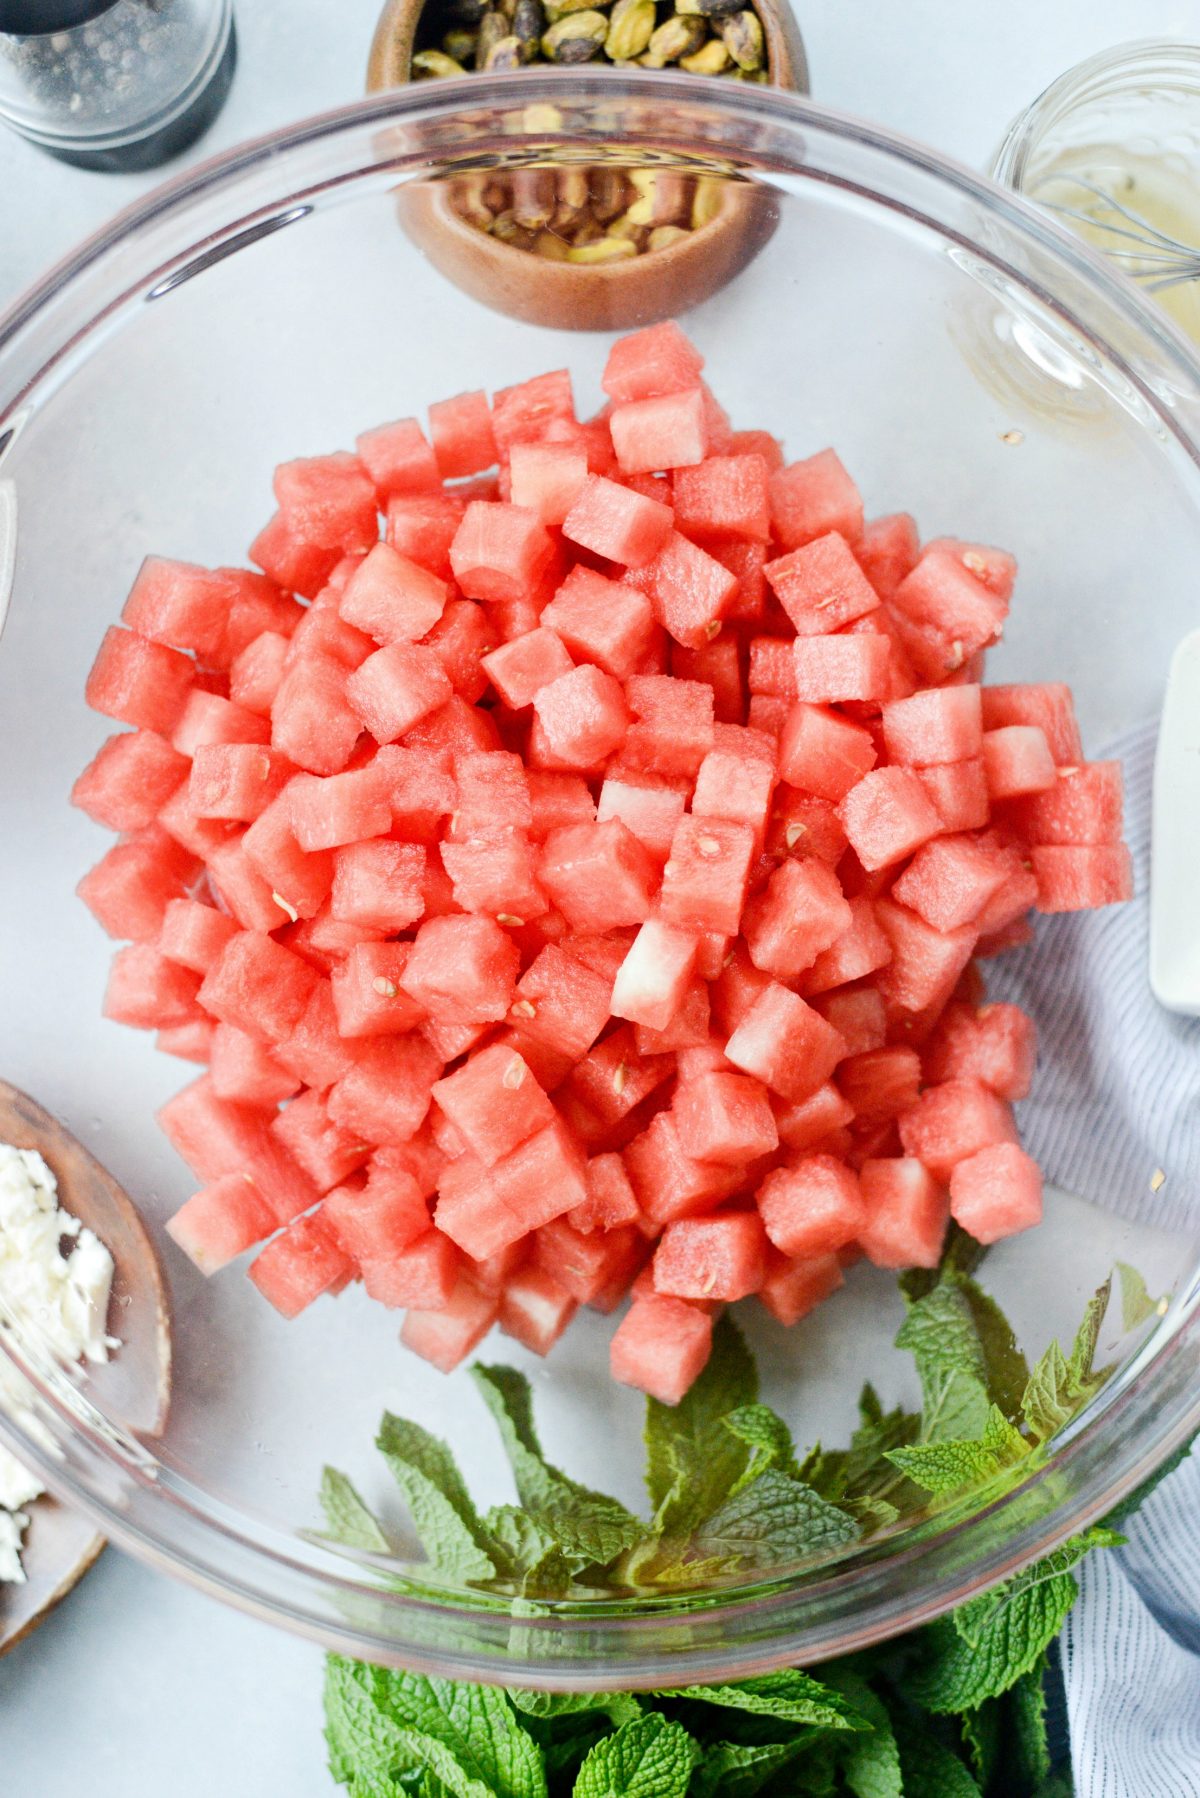 cubed watermelon in a bowl.